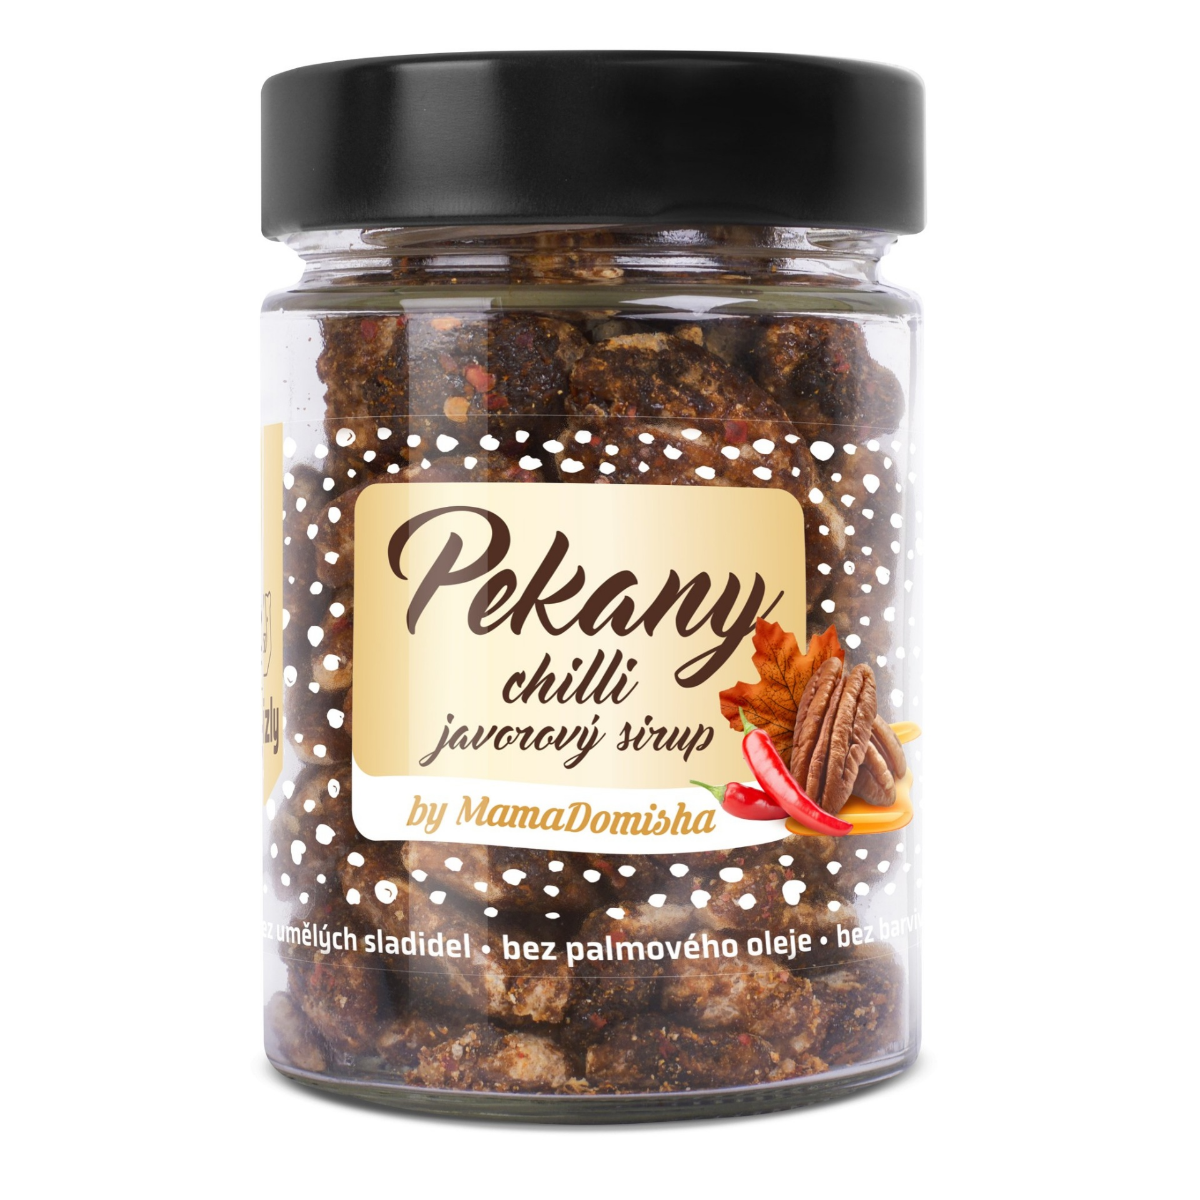 Grizly Pekany Chilly a javorový sirup by MamaDomisha 150 g Grizly